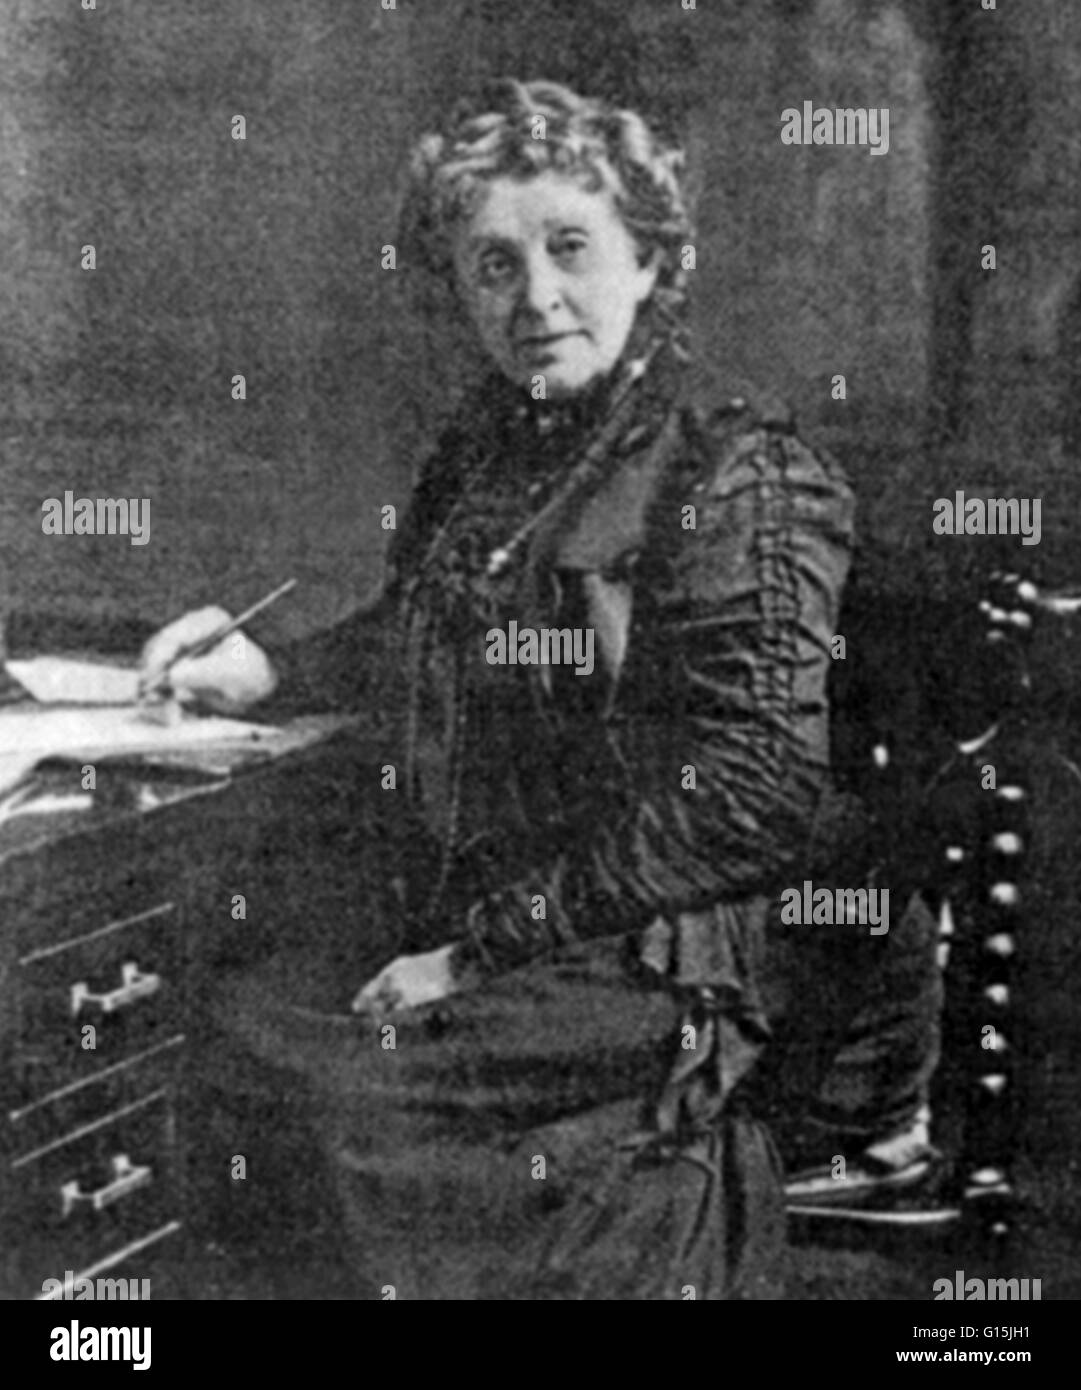 Josephine Garis Cochran (1839-1913) made the first practical mechanical dishwasher in 1886. First she measured the dishes. Then she built wire compartments, each specially designed to fit either plates, cups, or saucers. The compartments were placed insid Stock Photo